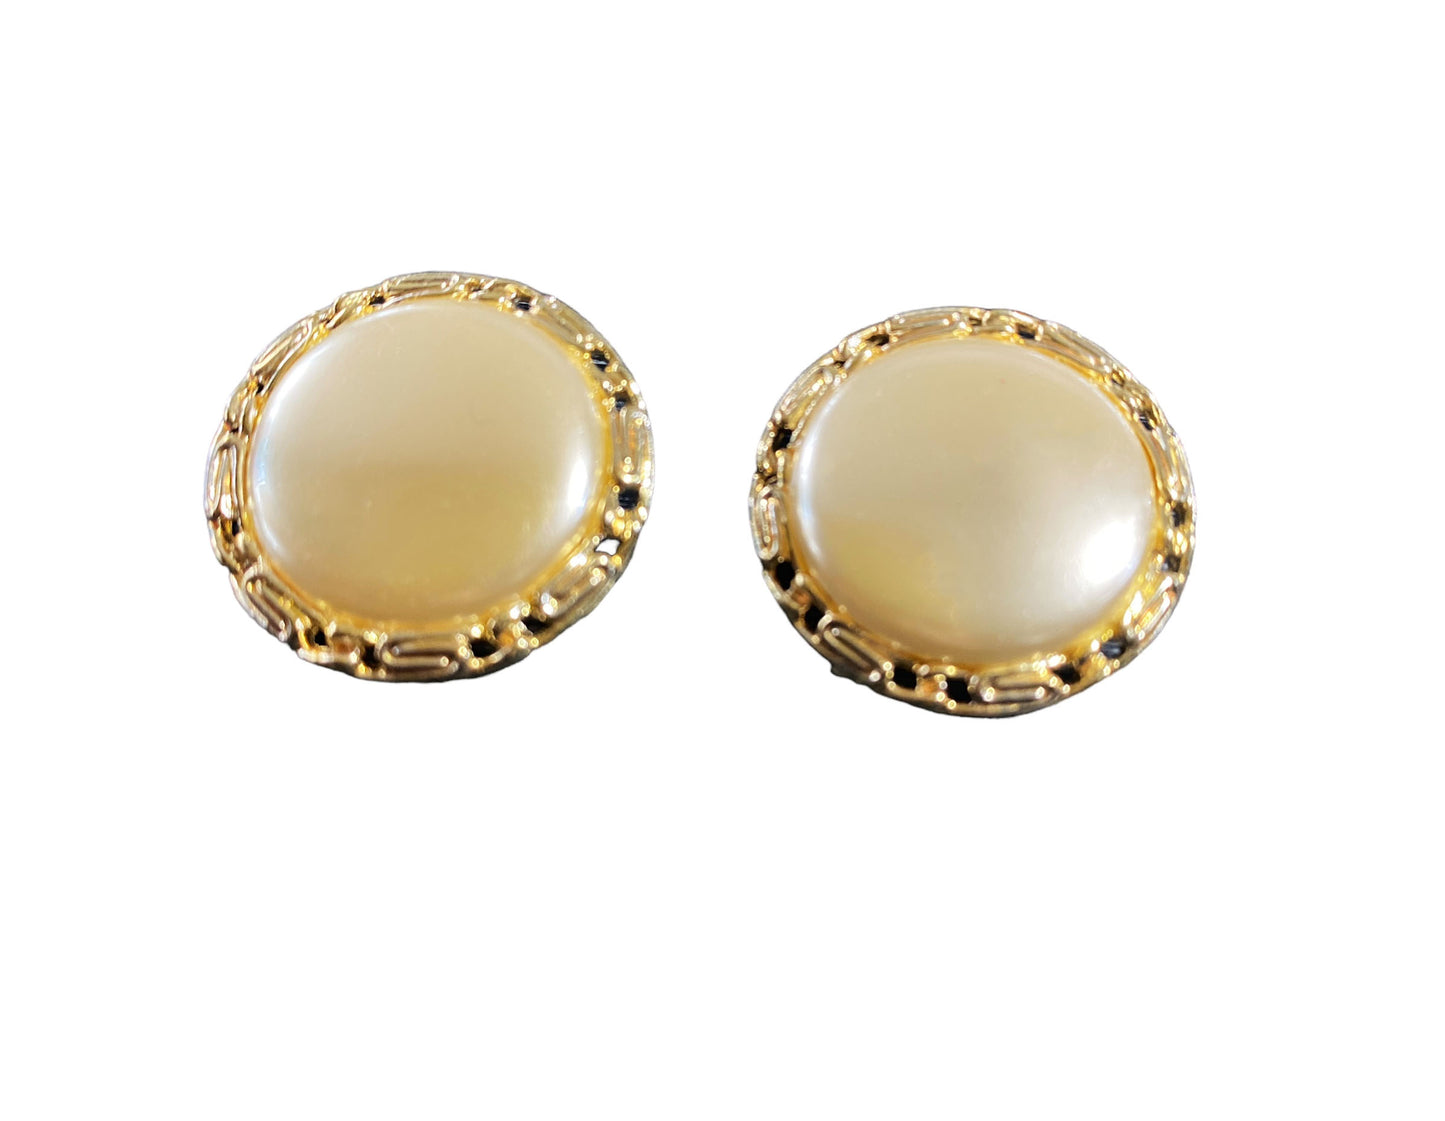 #5891 Vintage Lisner Round large faux pearl, Chain surround, Clips Earrings